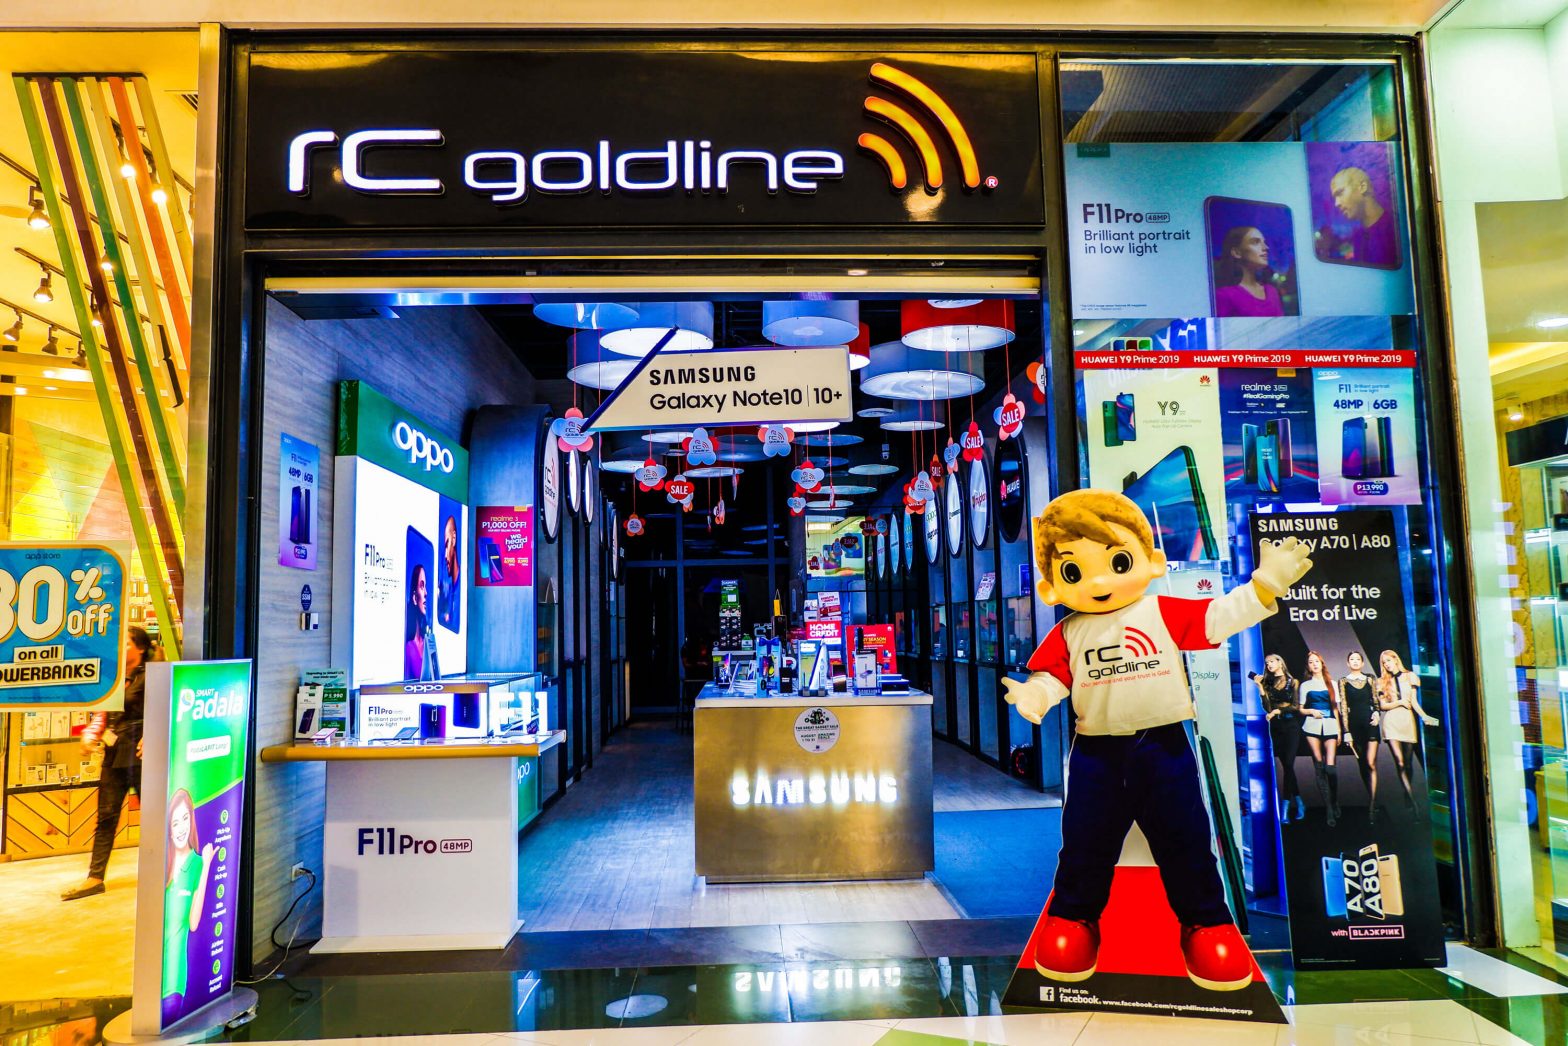 Mall Rover: Trust RC Goldline with your cellphone, gadget needs